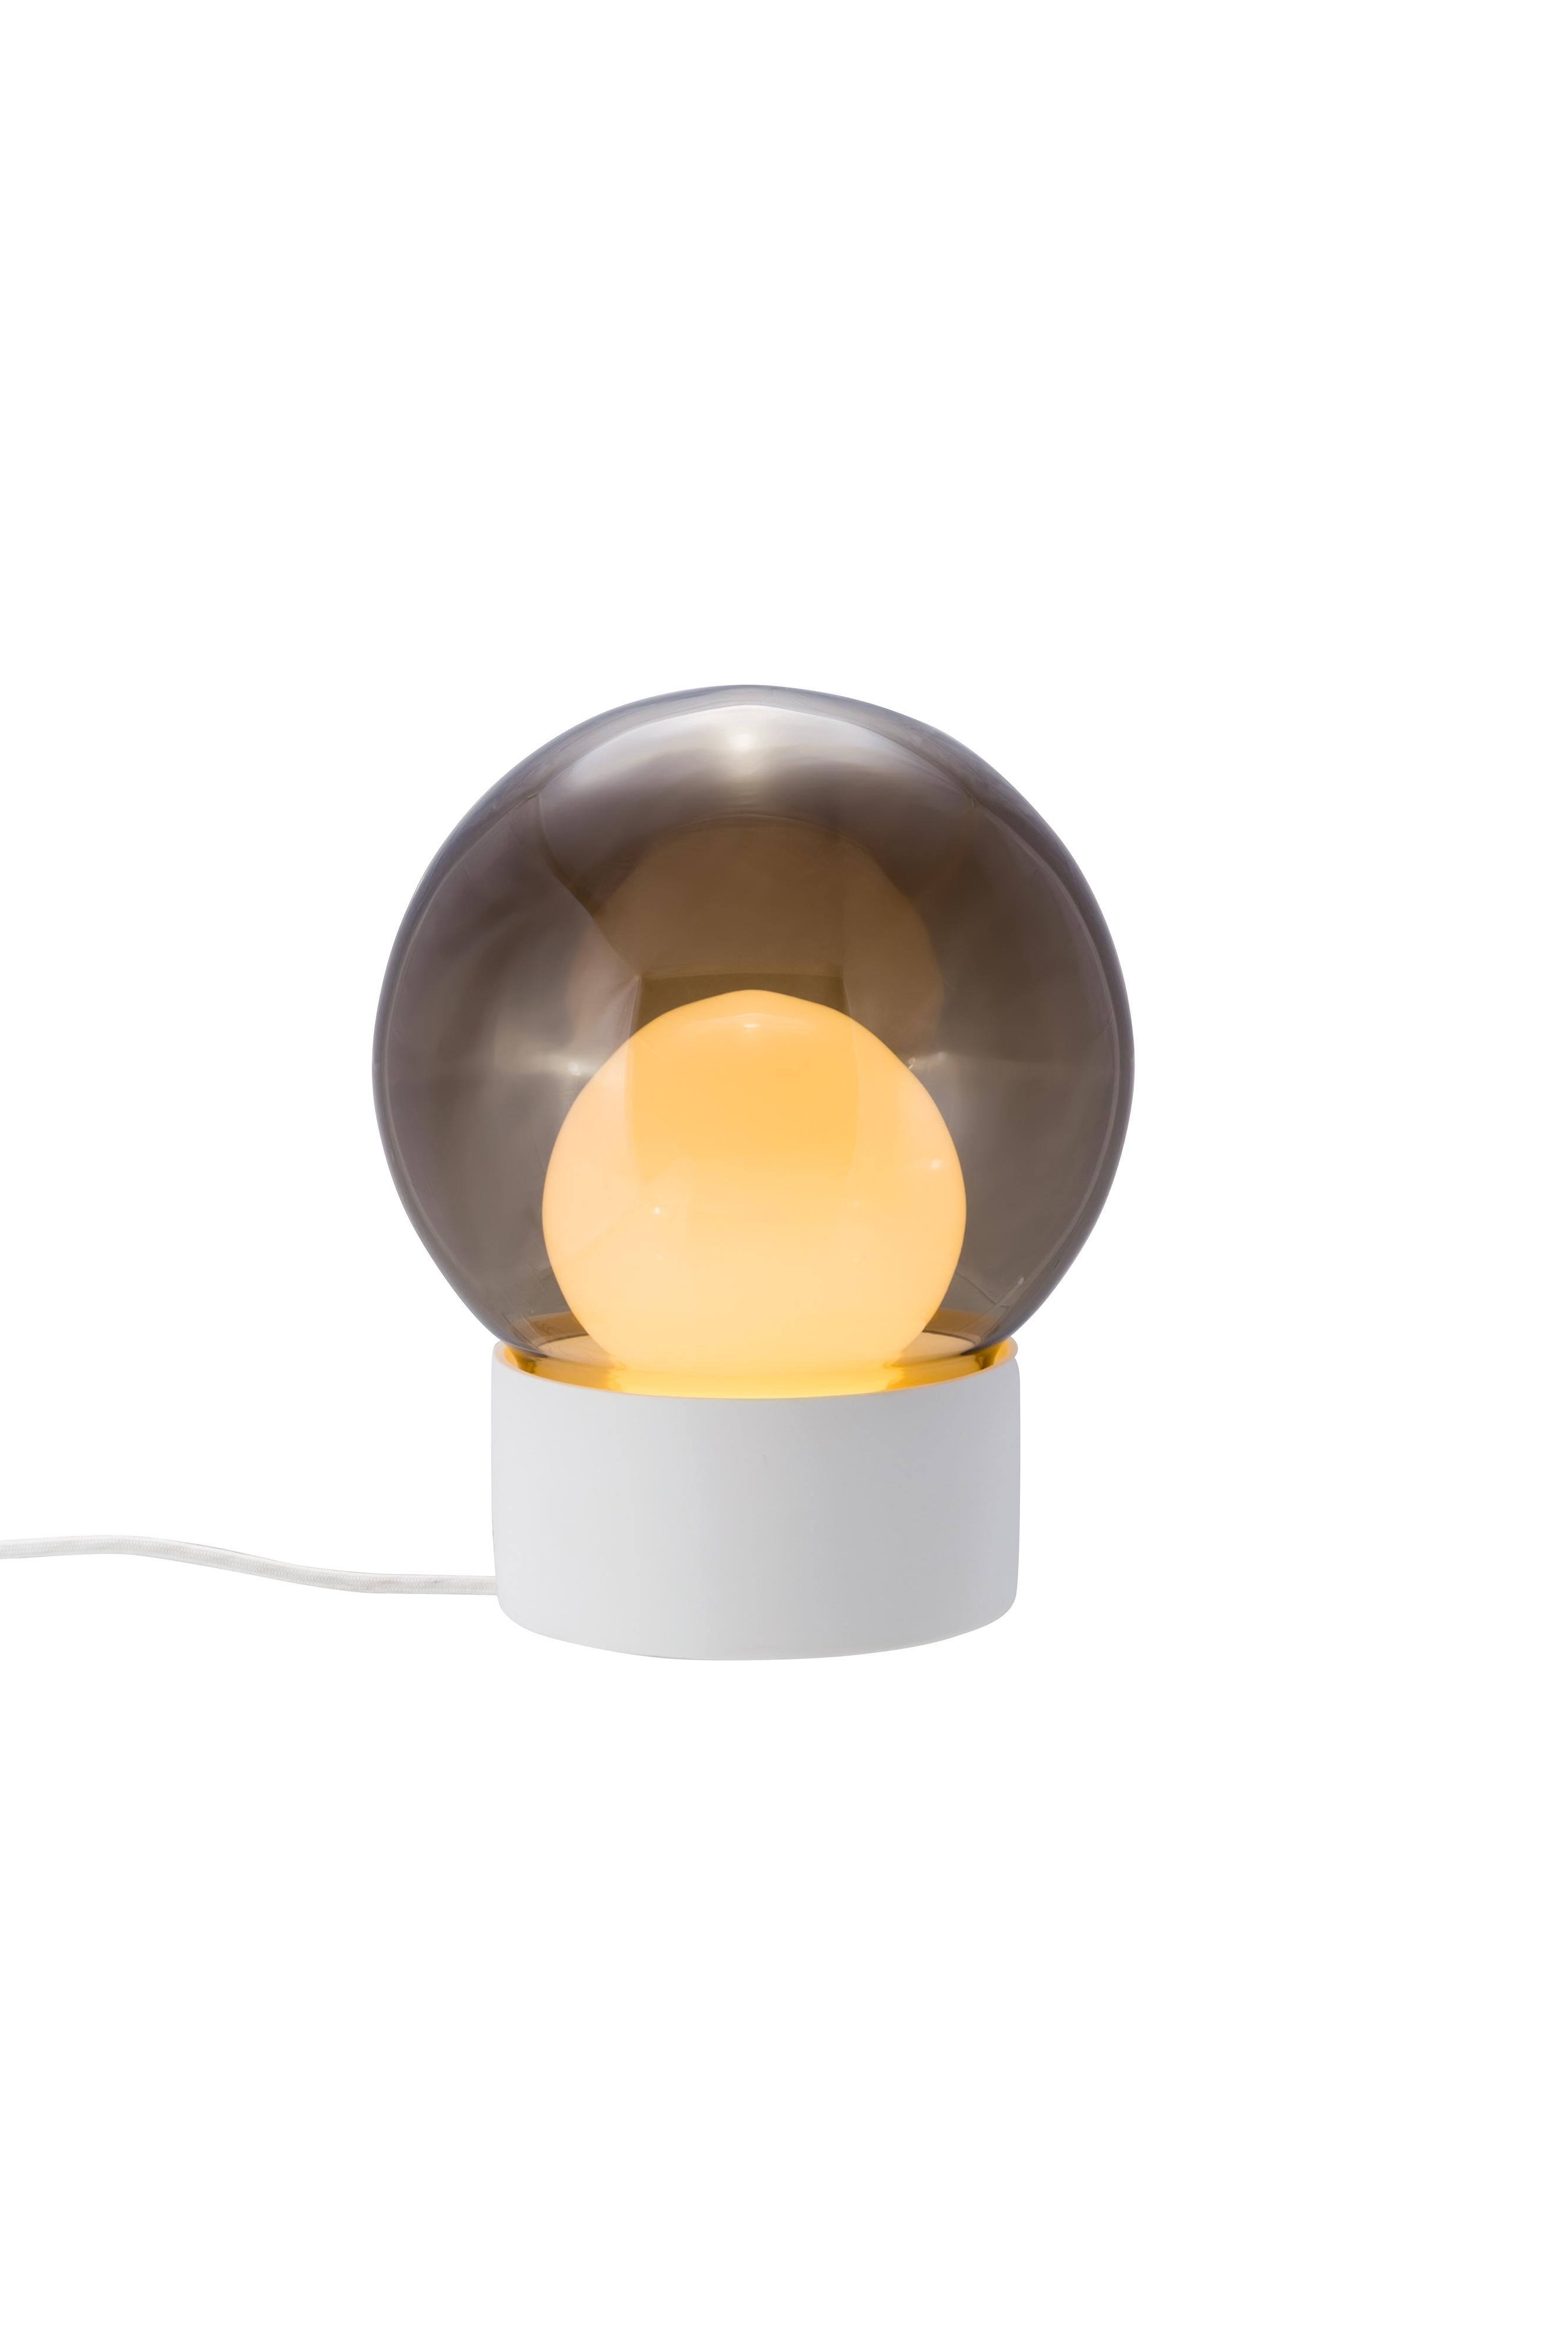 Boule small smoky grey opal white table lamp by Pulpo
Dimensions: D 29 x H 35.5 cm
Materials: ceramic, handblown glass, coloured, textile.

Also available in different finishes: transparent opal white black, transparent smoky grey black, smoky